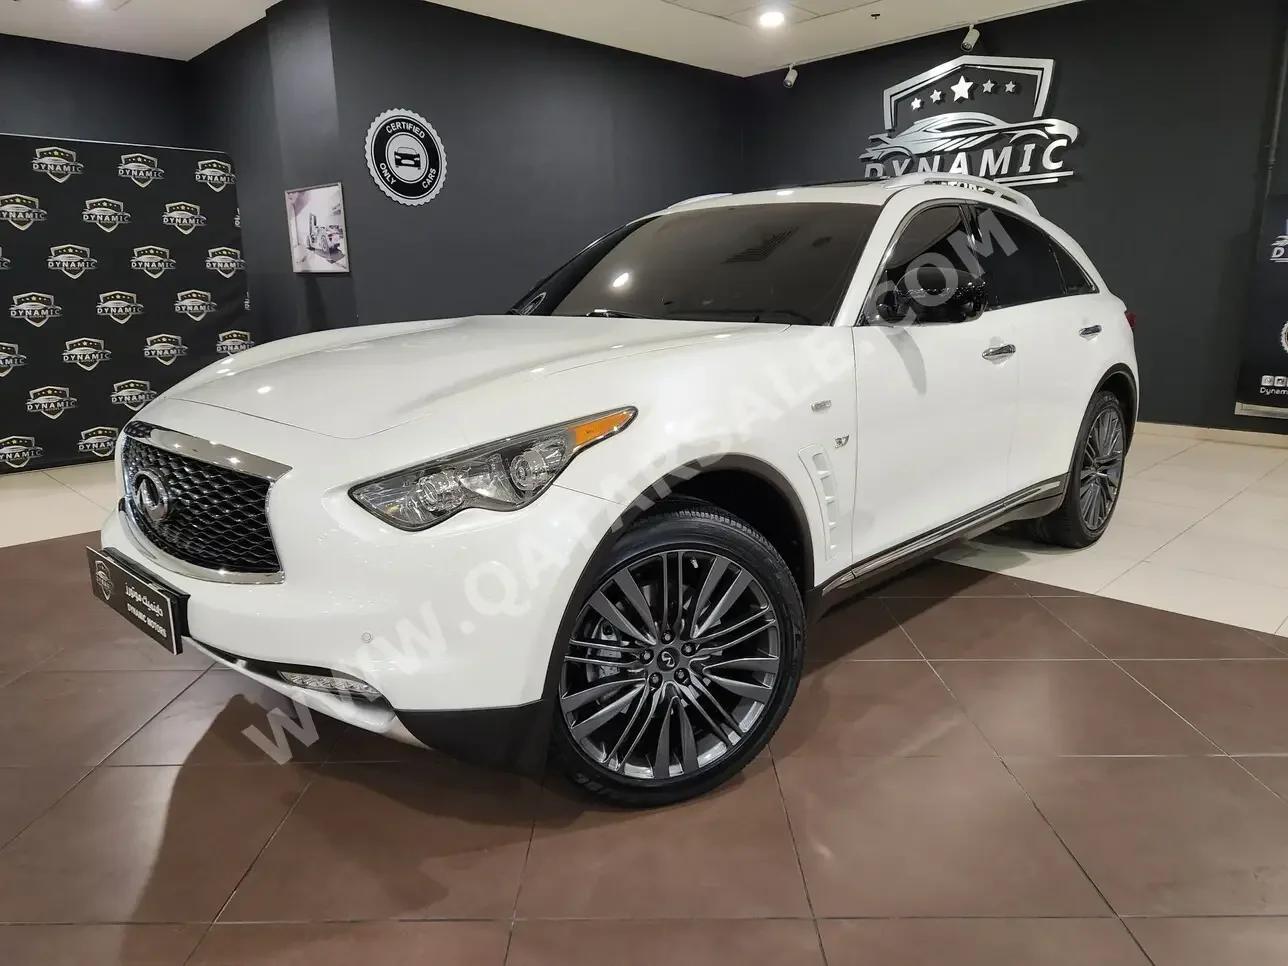 Infiniti  QX  70 Limited  2020  Automatic  41,000 Km  6 Cylinder  All Wheel Drive (AWD)  SUV  White  With Warranty